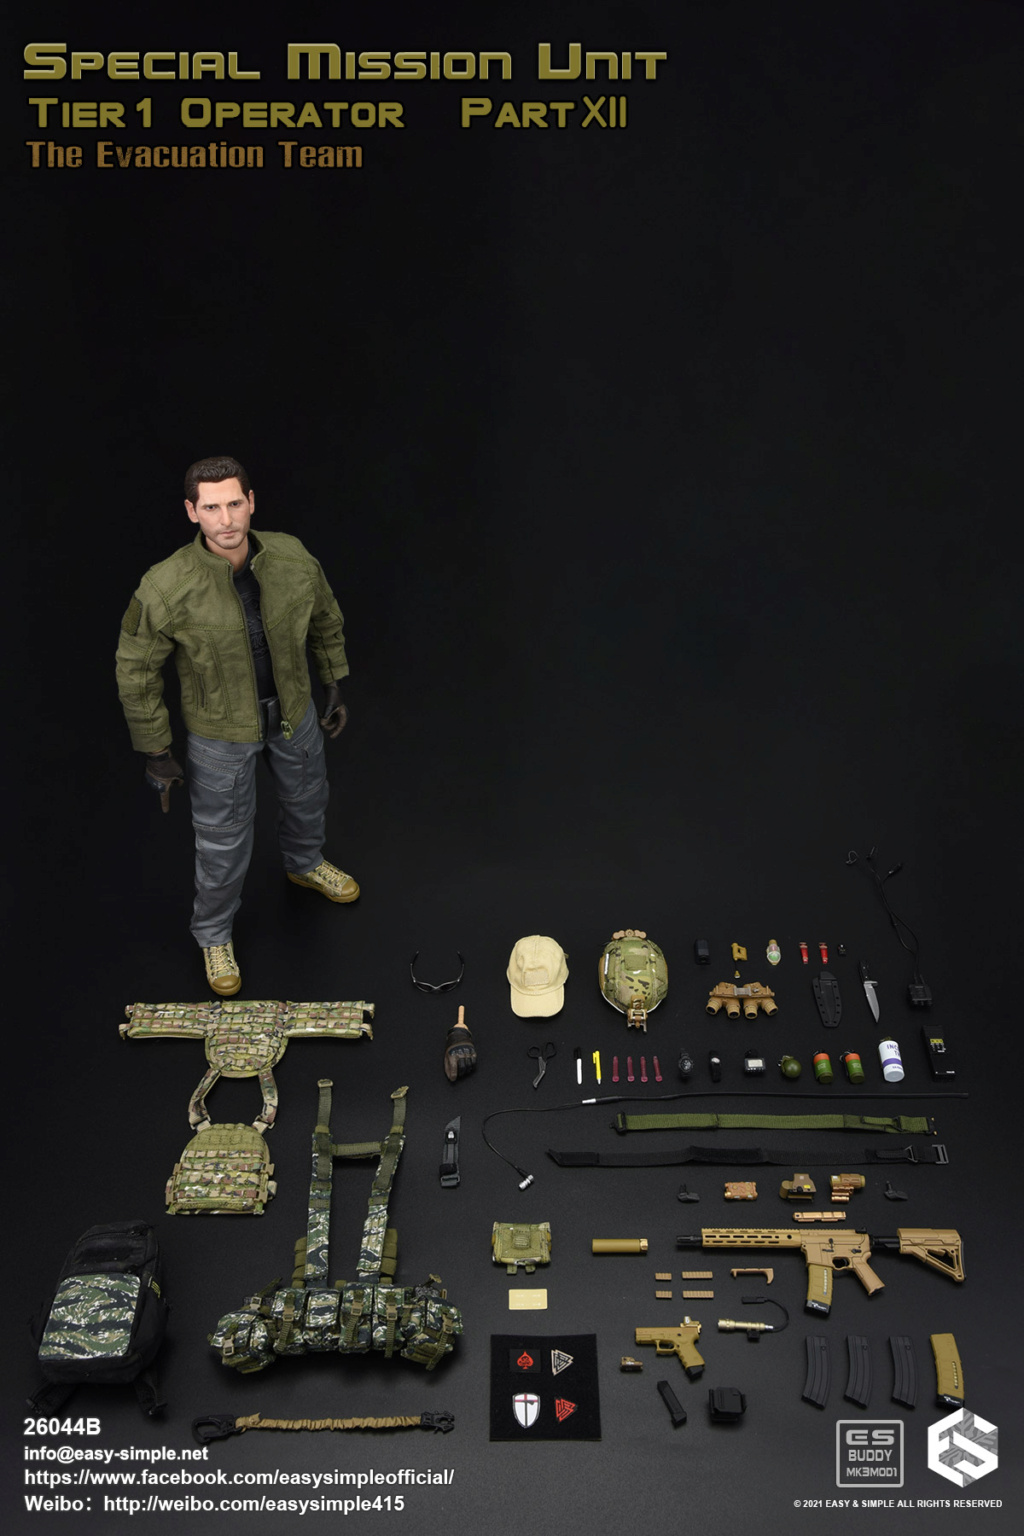 SpecialMissionUnit - NEW PRODUCT: Easy&Simple: 26044B Special Mission Unit Tier1 Operator Part XII The Evacuation Team 83ca3110